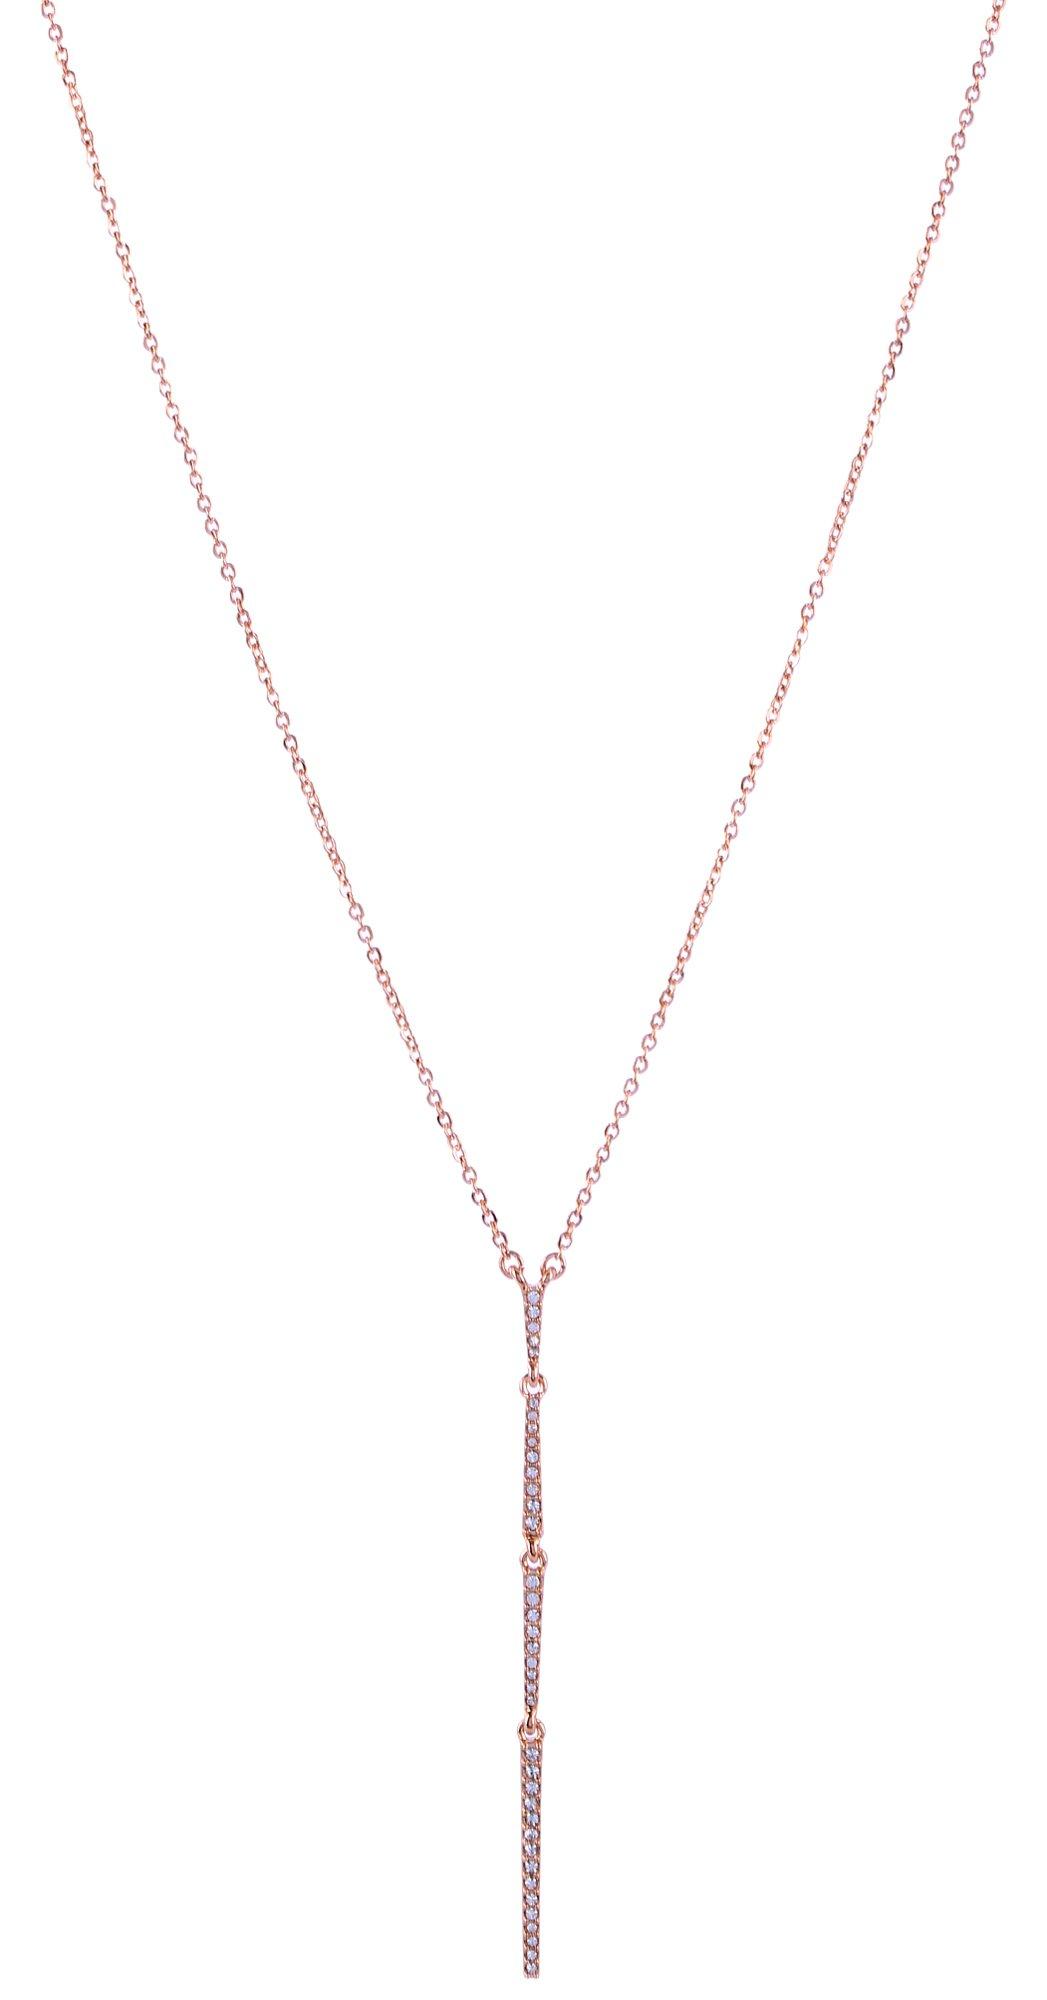 20 In. Pave Rose Gold Tone Y-Necklace